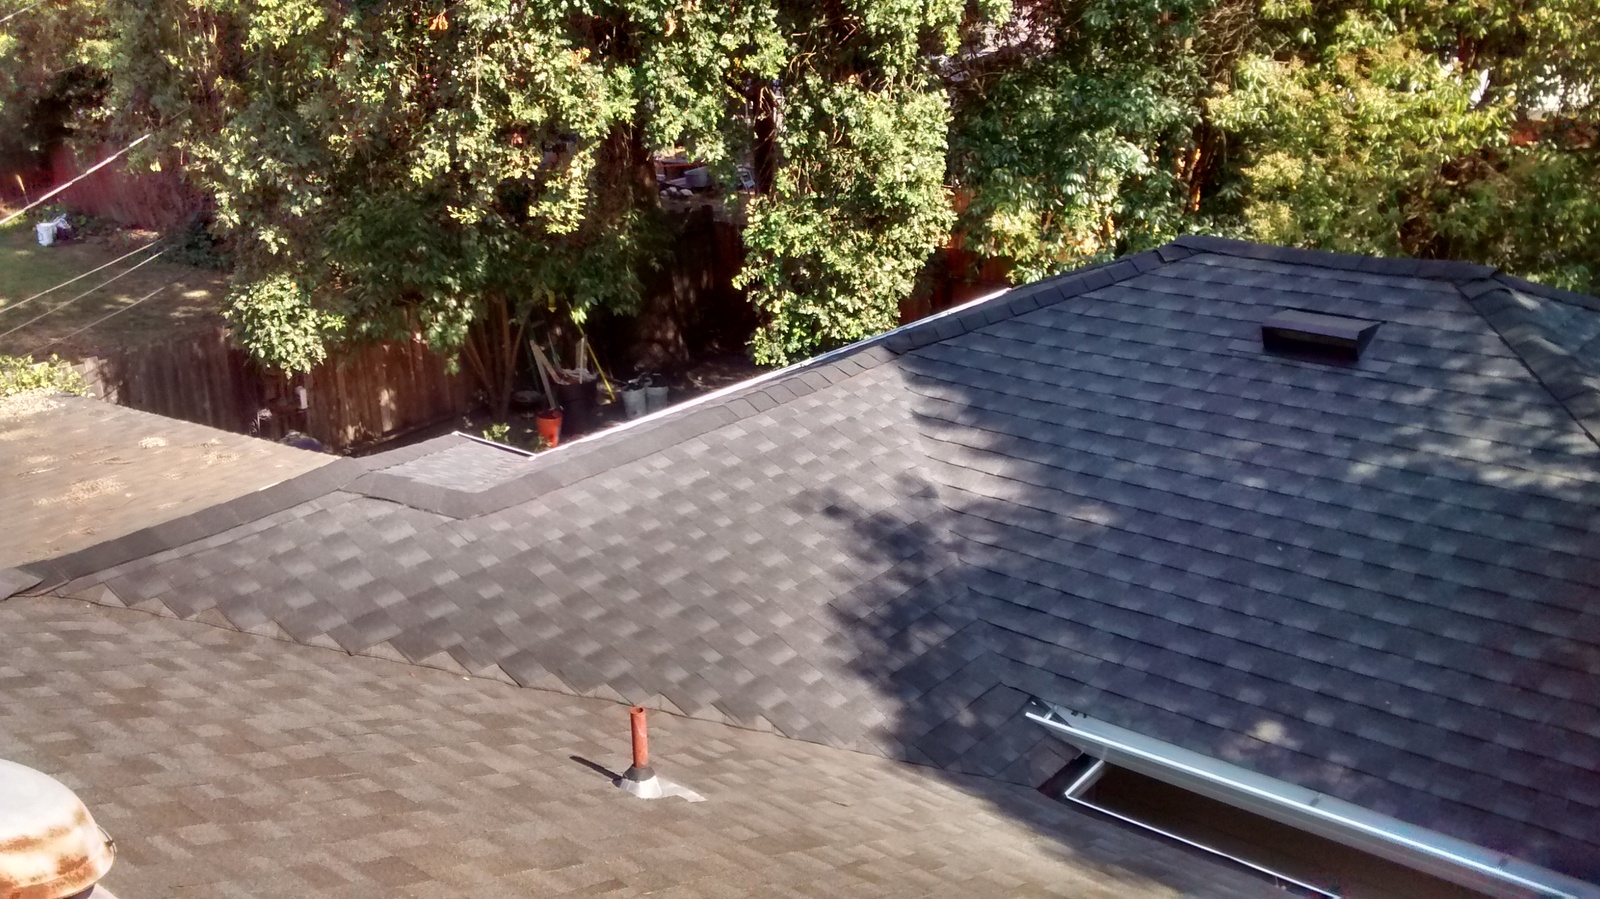 Sonoma Ave Roof finished